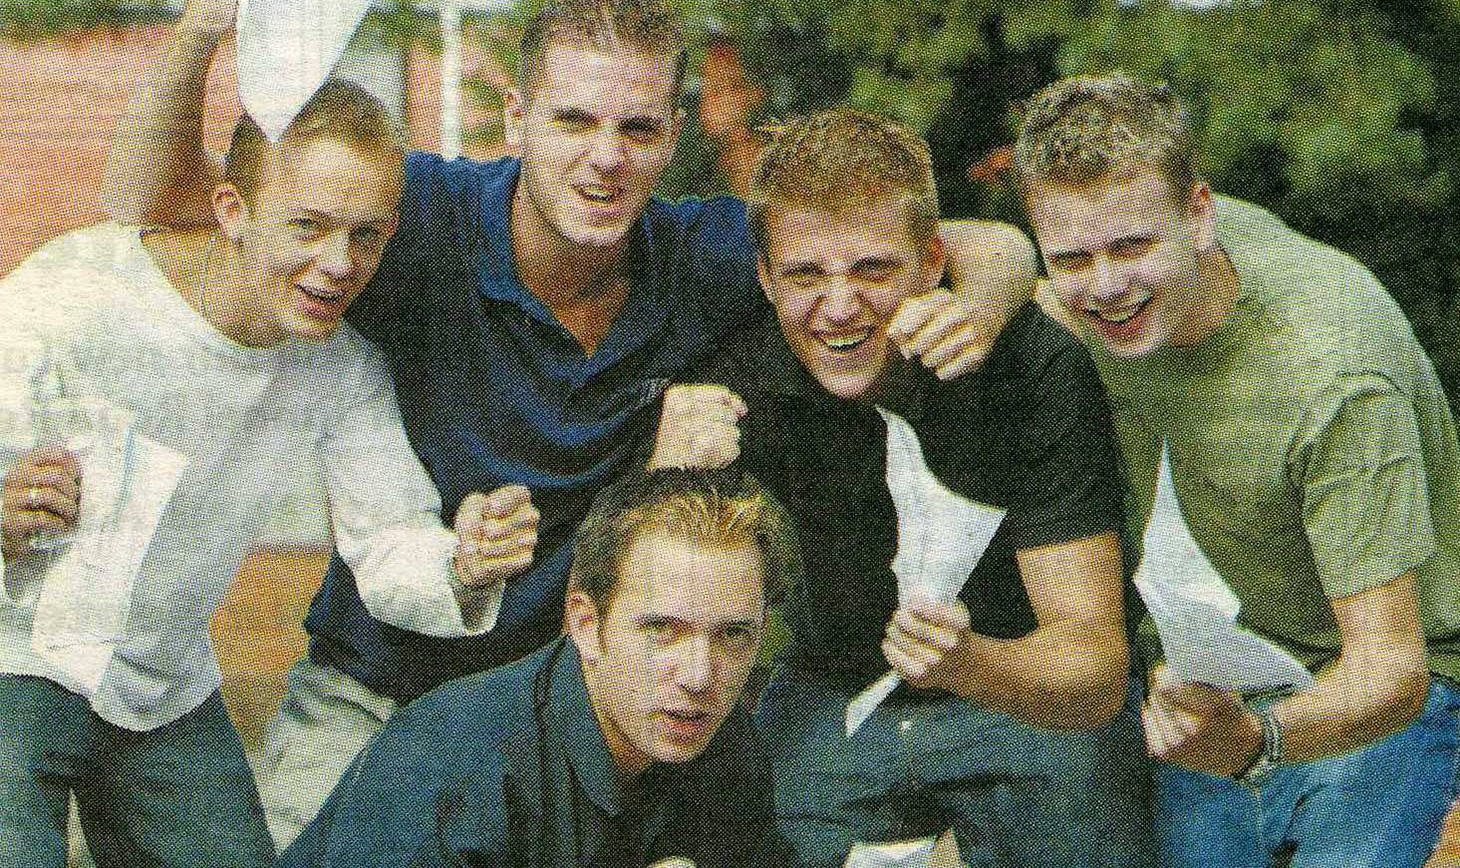 A-Level results day 2002